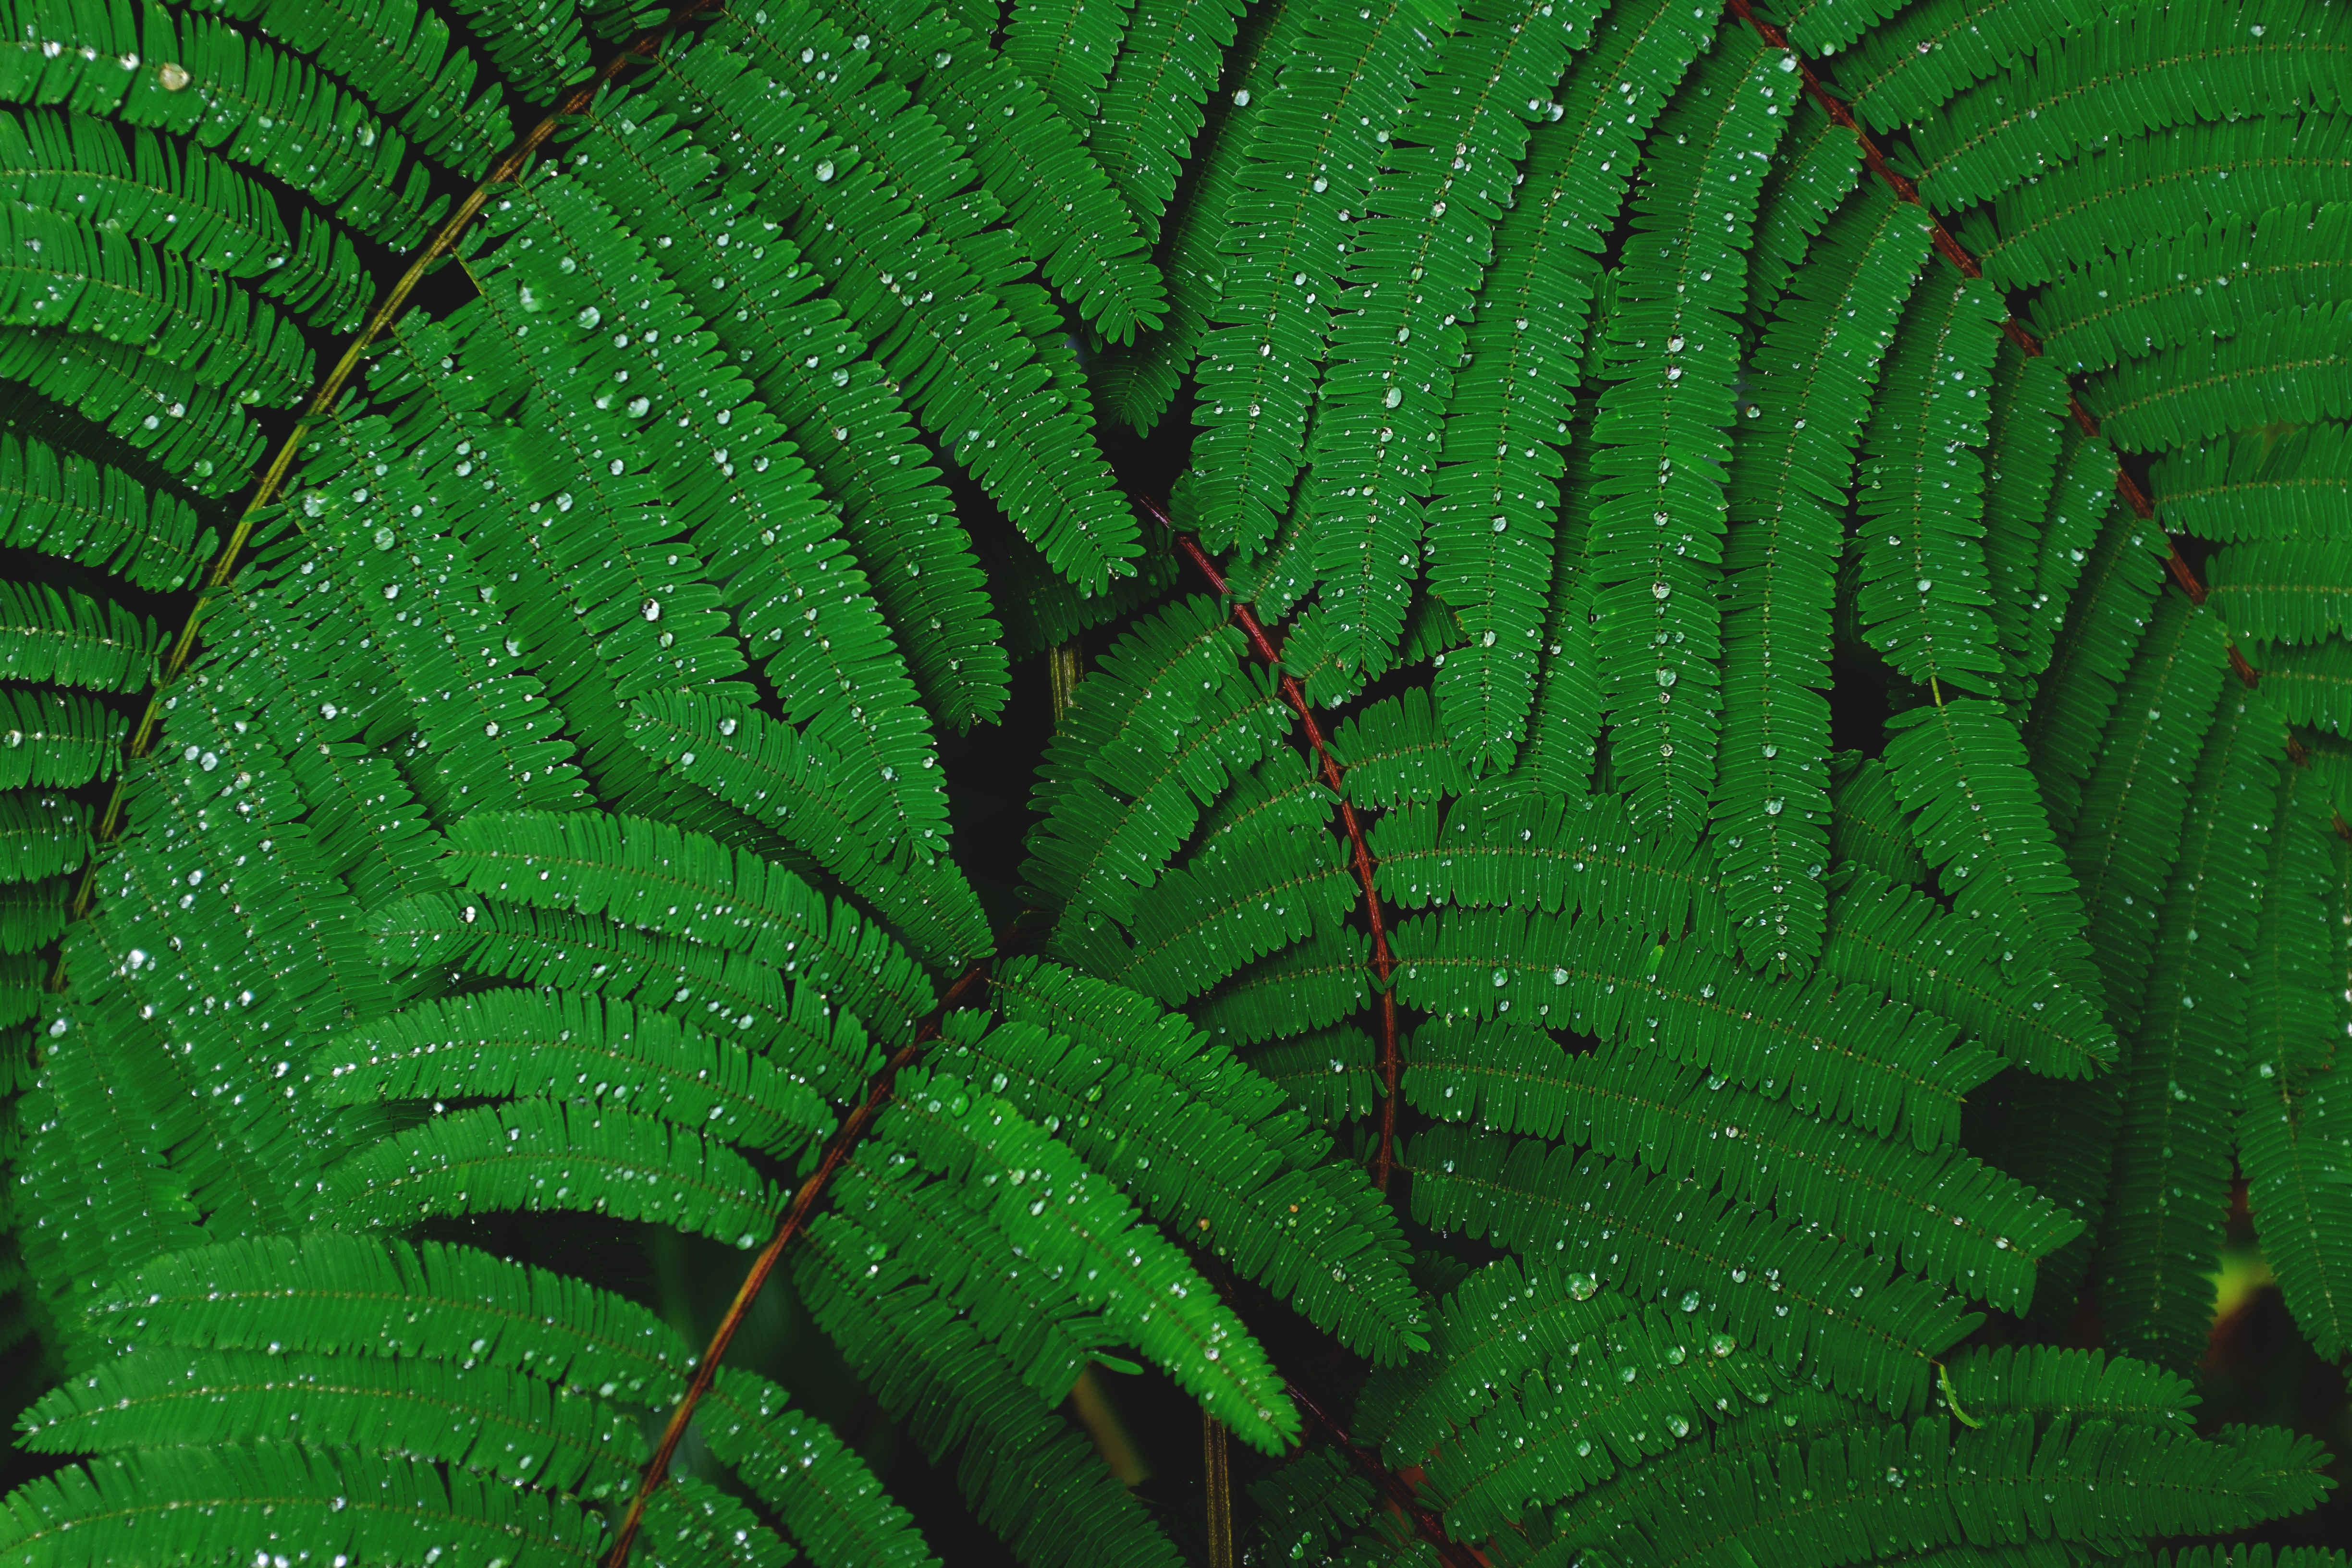 Leaves Nature Plants Water Drops 4896x3264